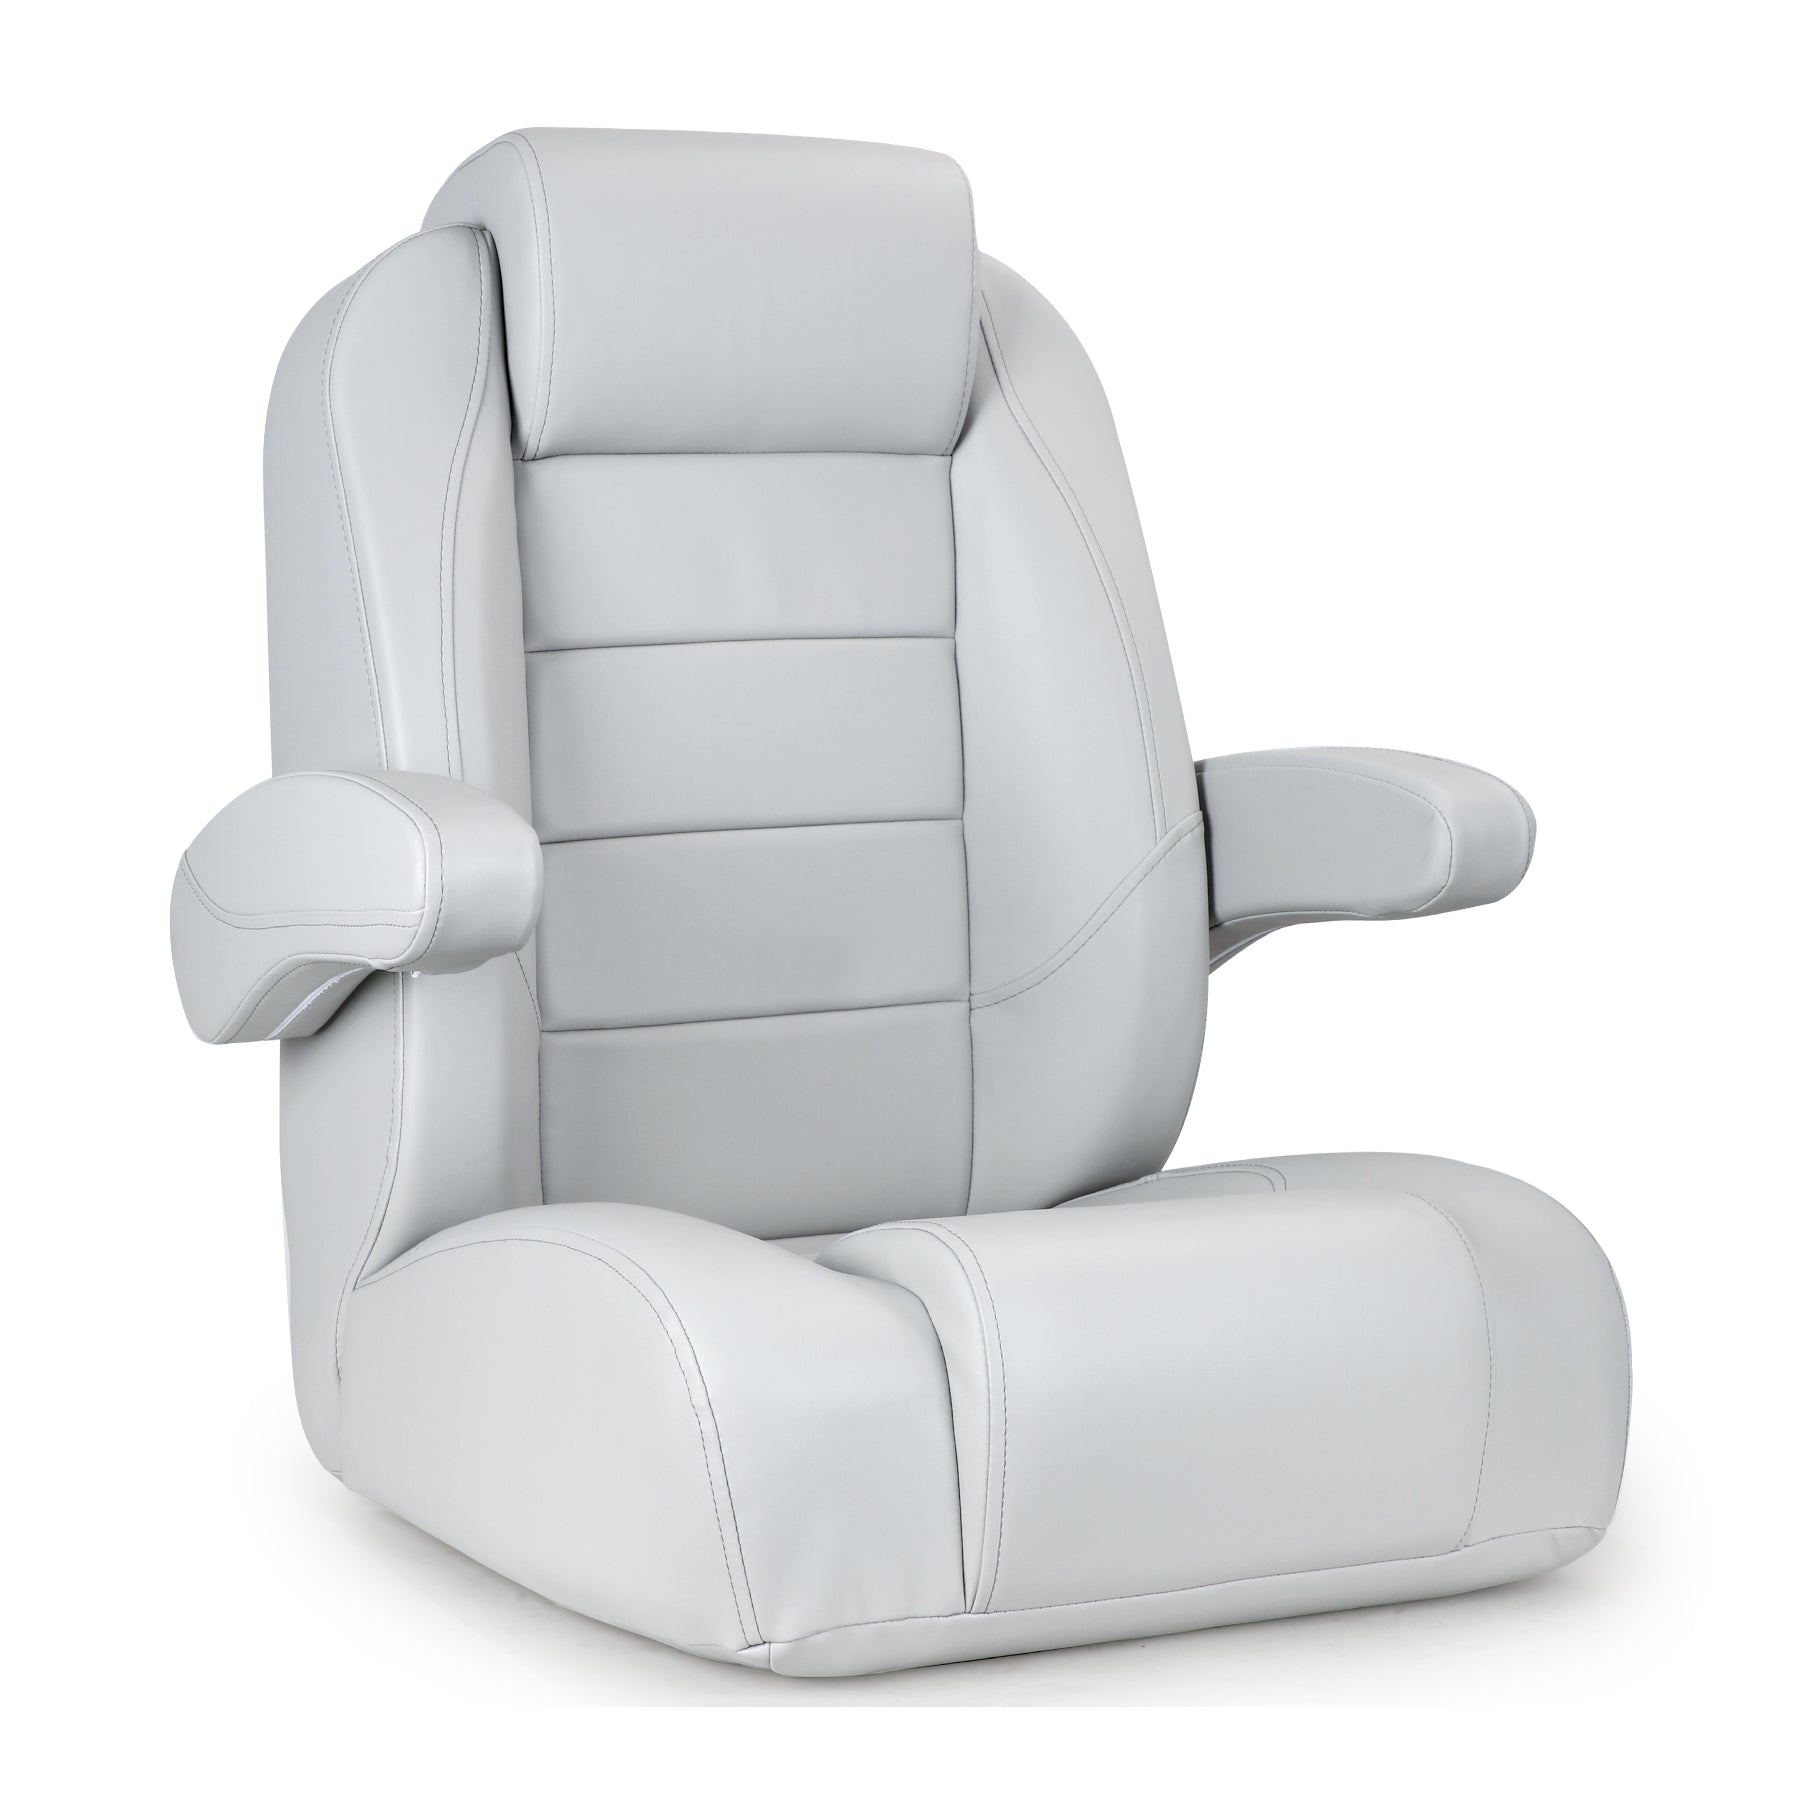 Luxury Recliner Sport Captains Chair Boat Seat with flip up armrests